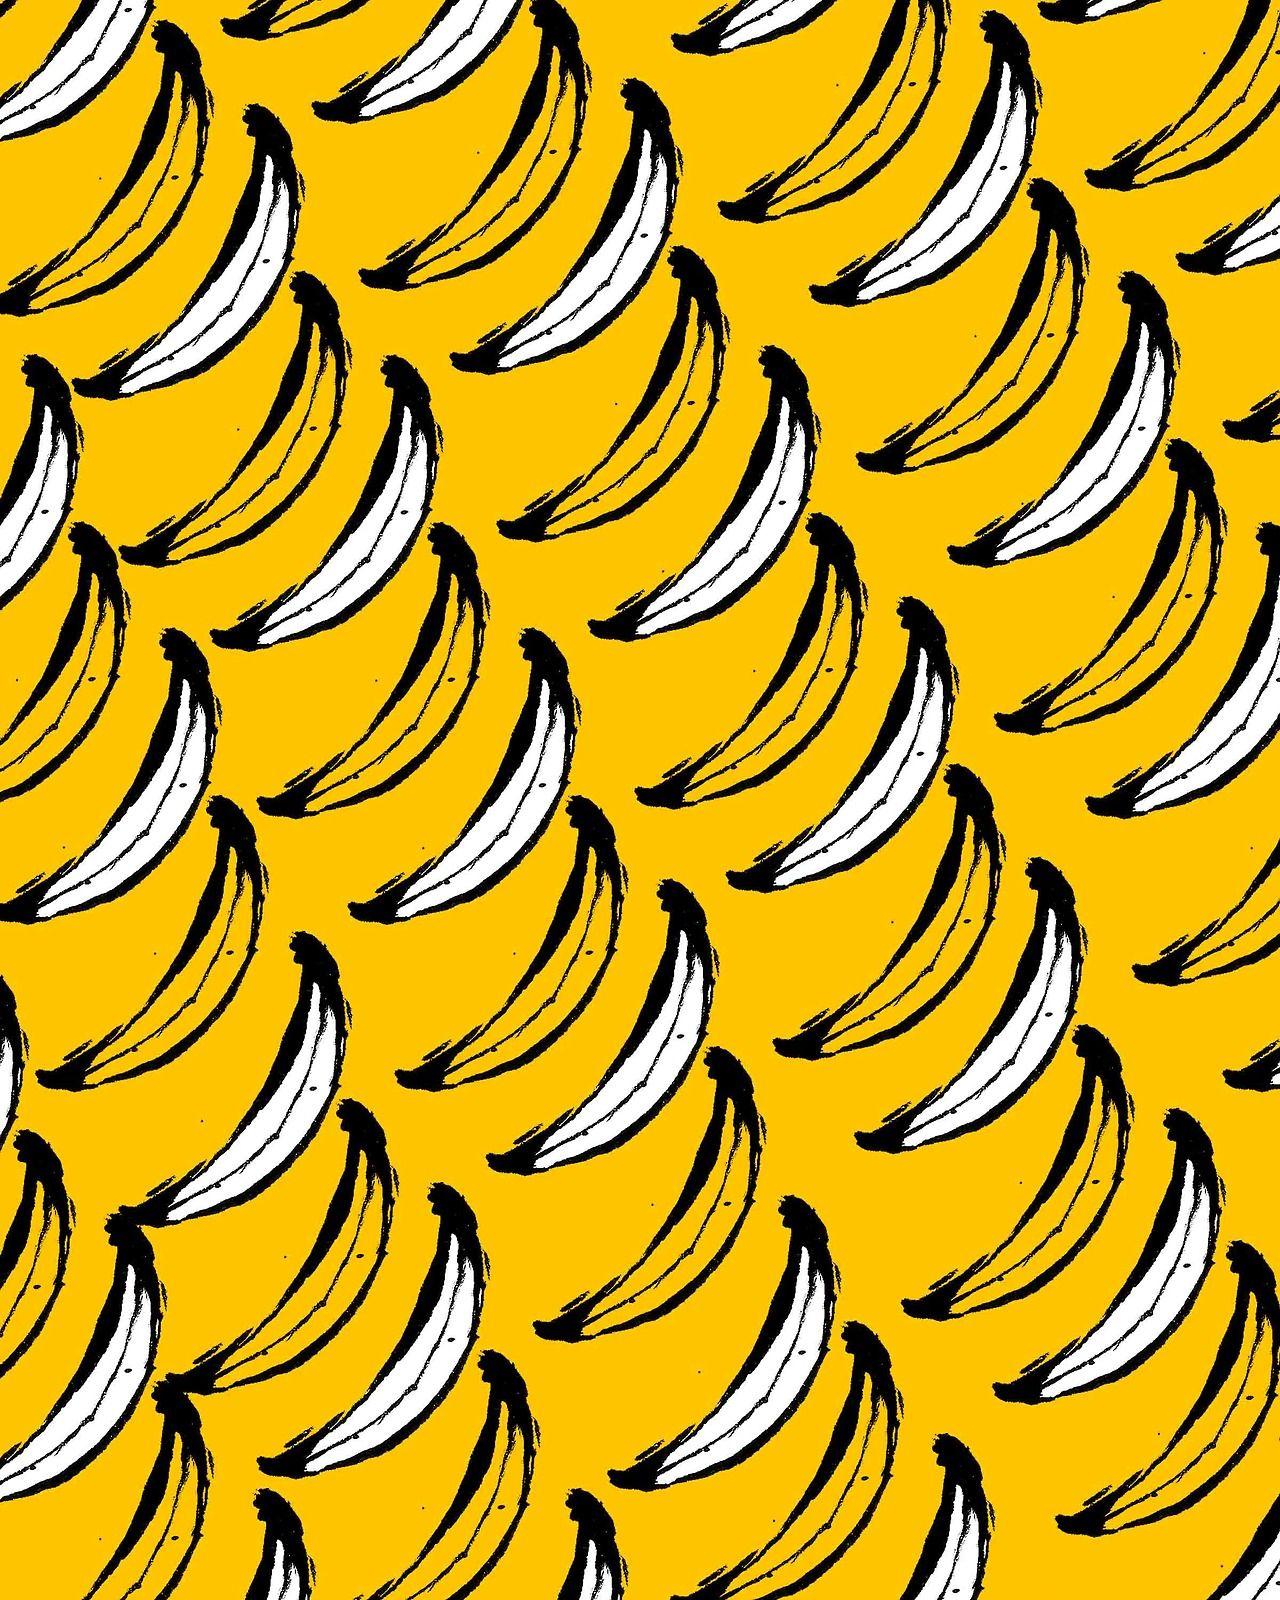 banana, yellow, pattern, wallpaper, background,. Repeat.endlessly